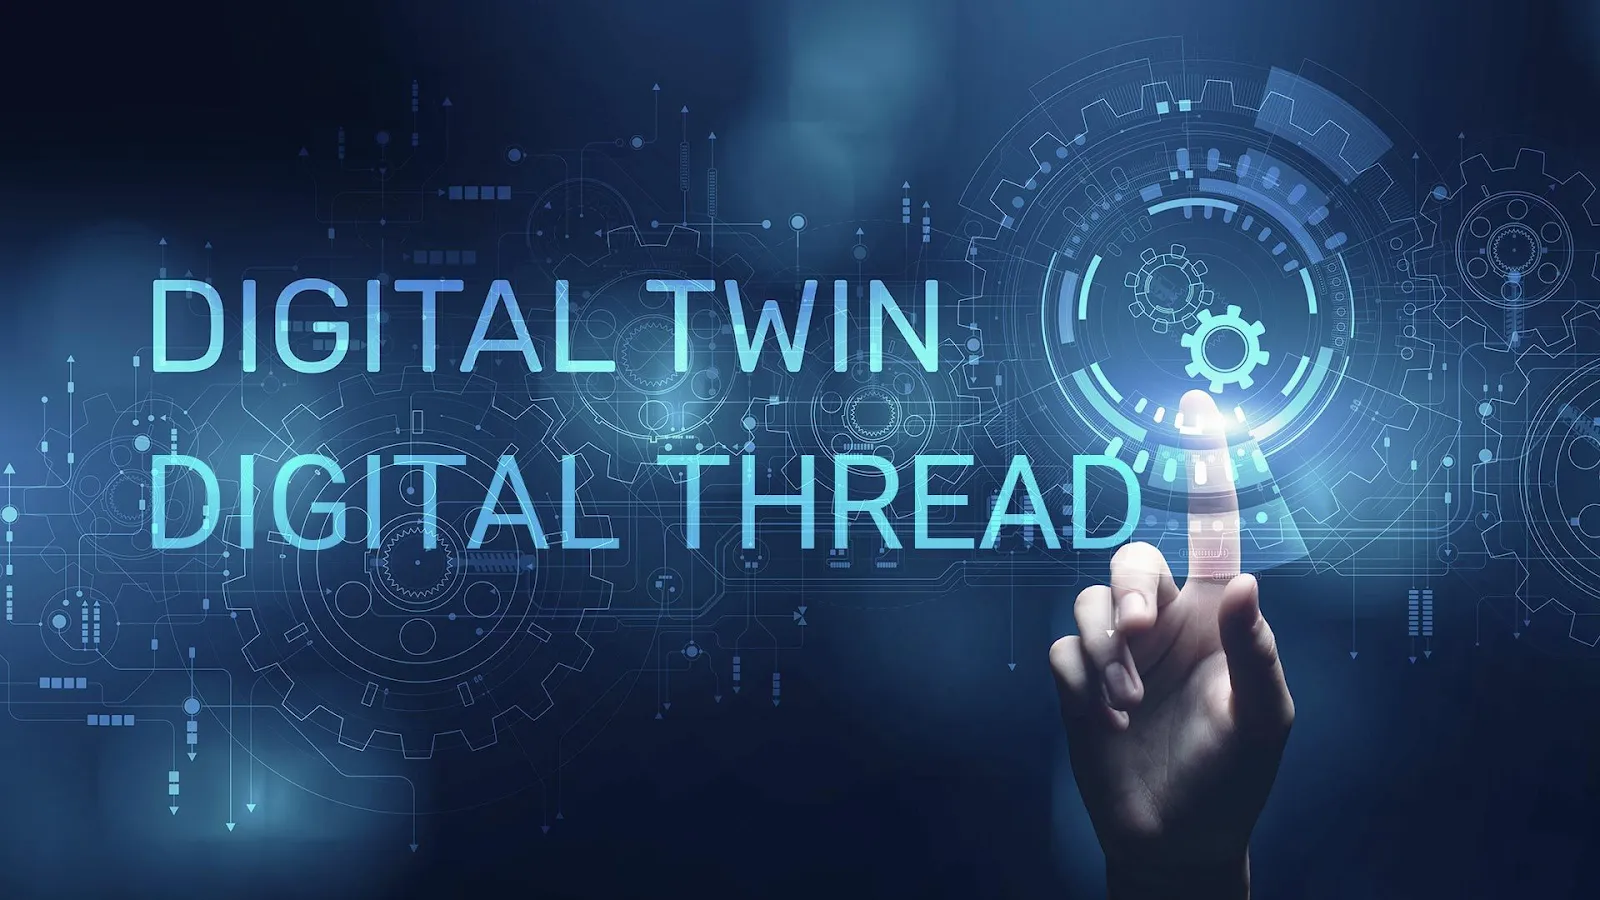 Digital Twin vs. Digital Thread: Definition, Benefits, and More